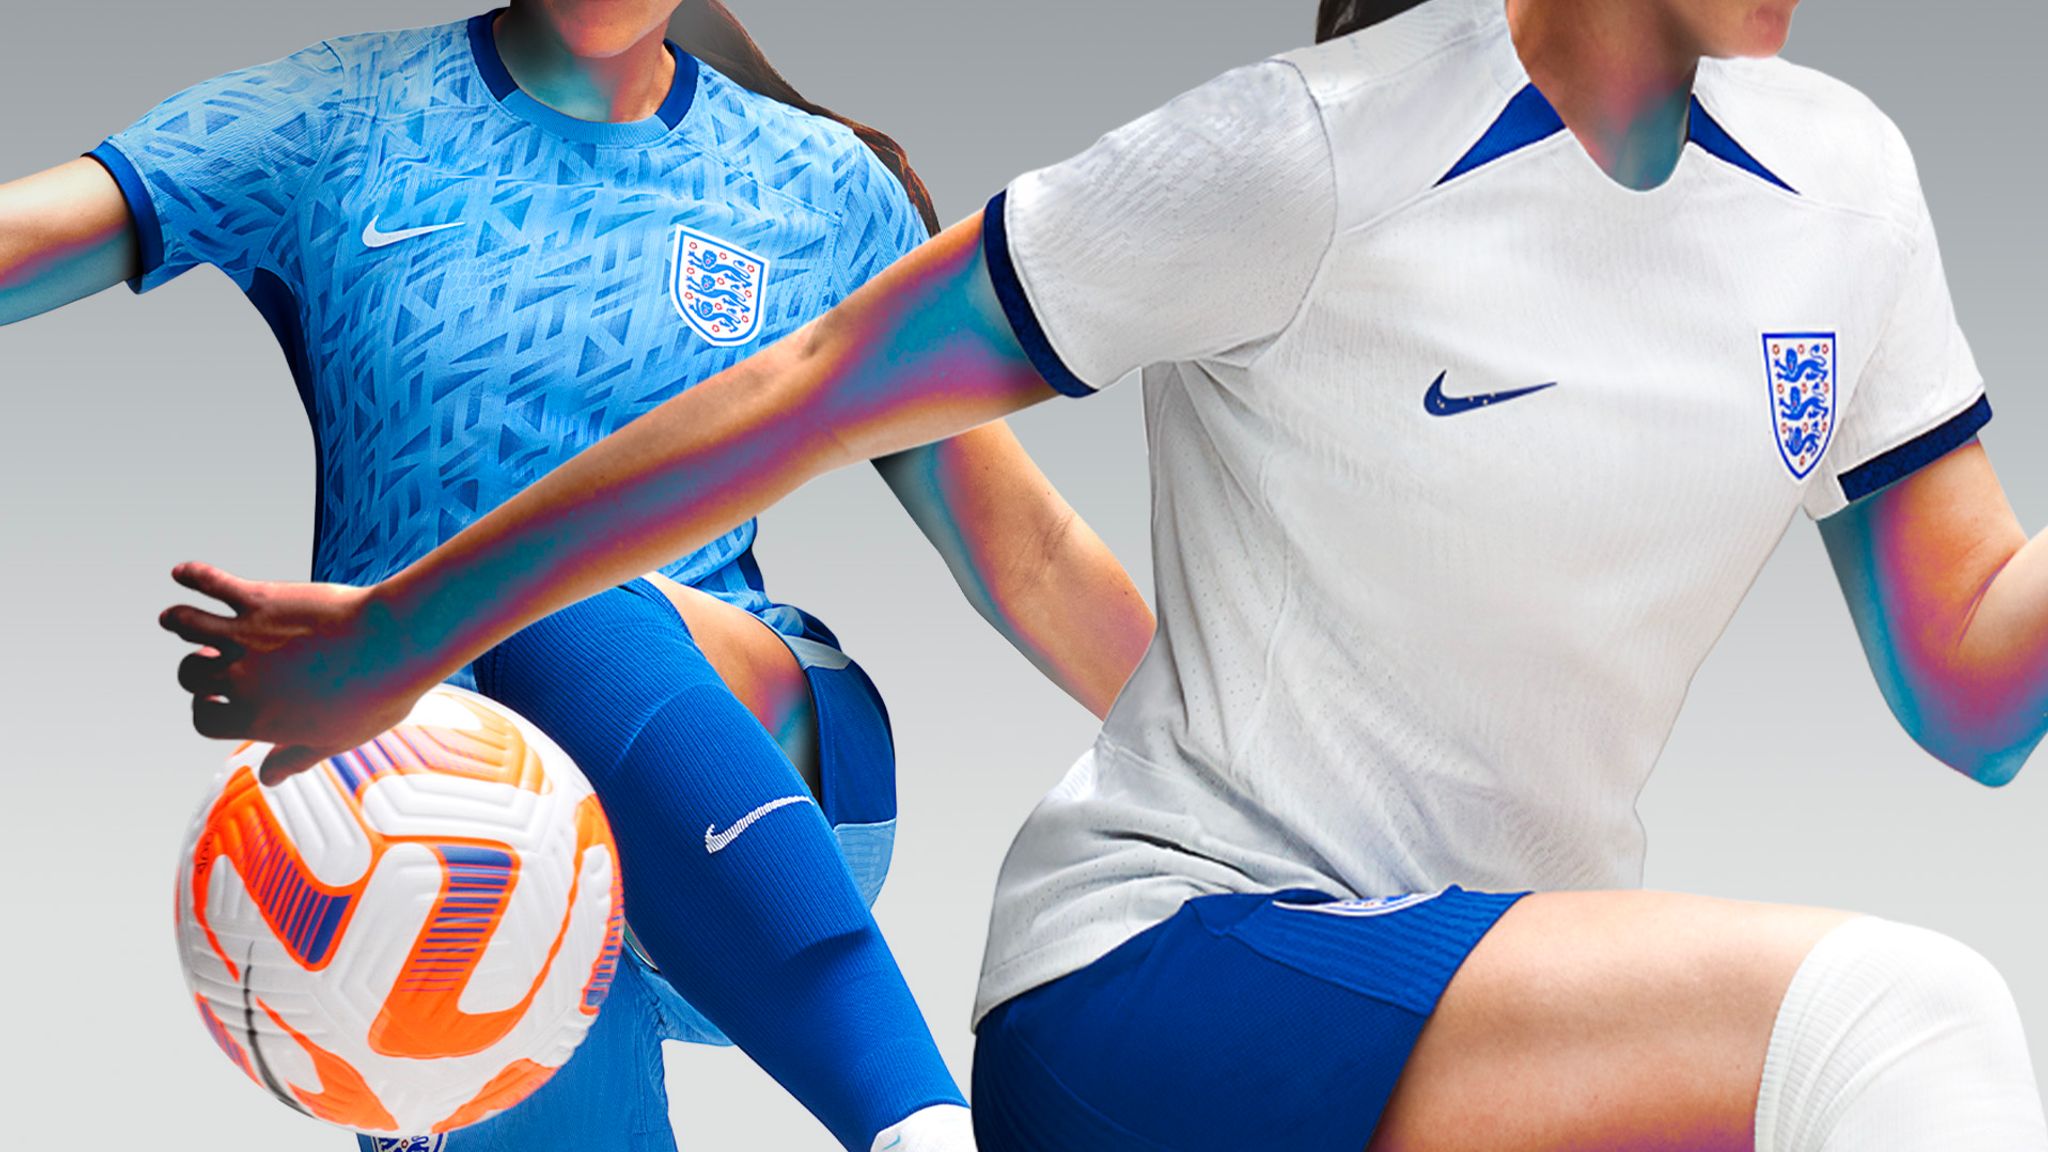 England Women's new kits switch to blue shorts from white shorts after